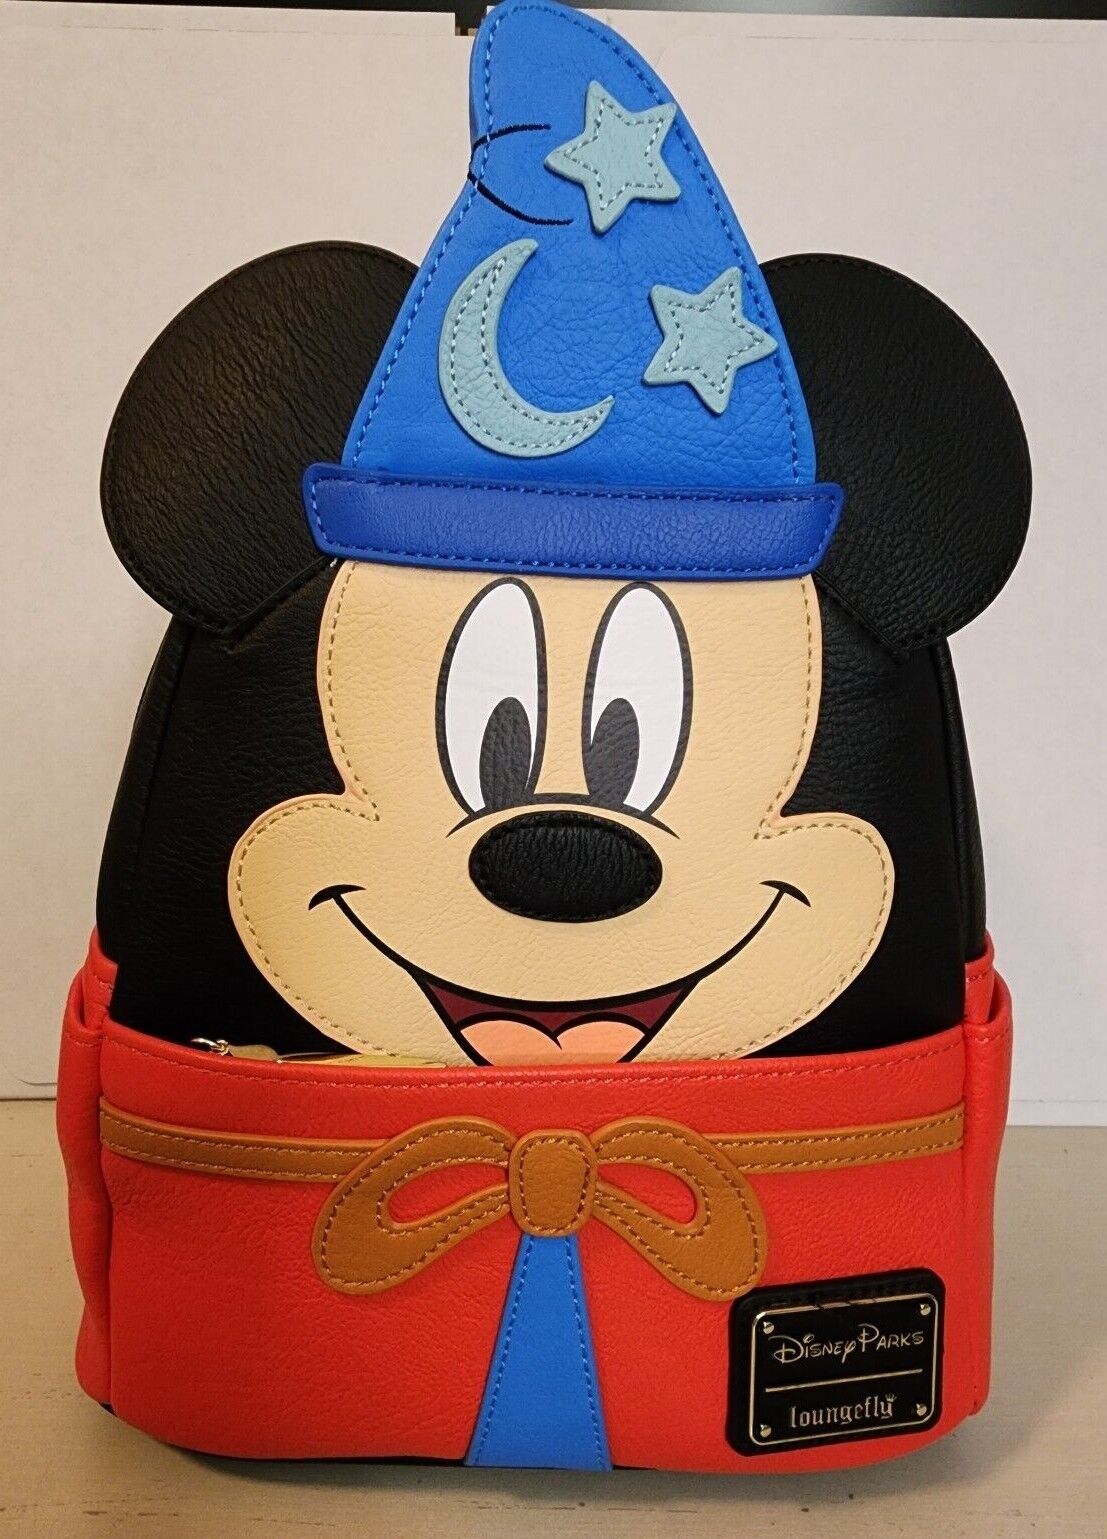 2020 Disney Ink & Paint Sorcerer Mickey Loungefly Backpack SIGNED BY BRET IWAN